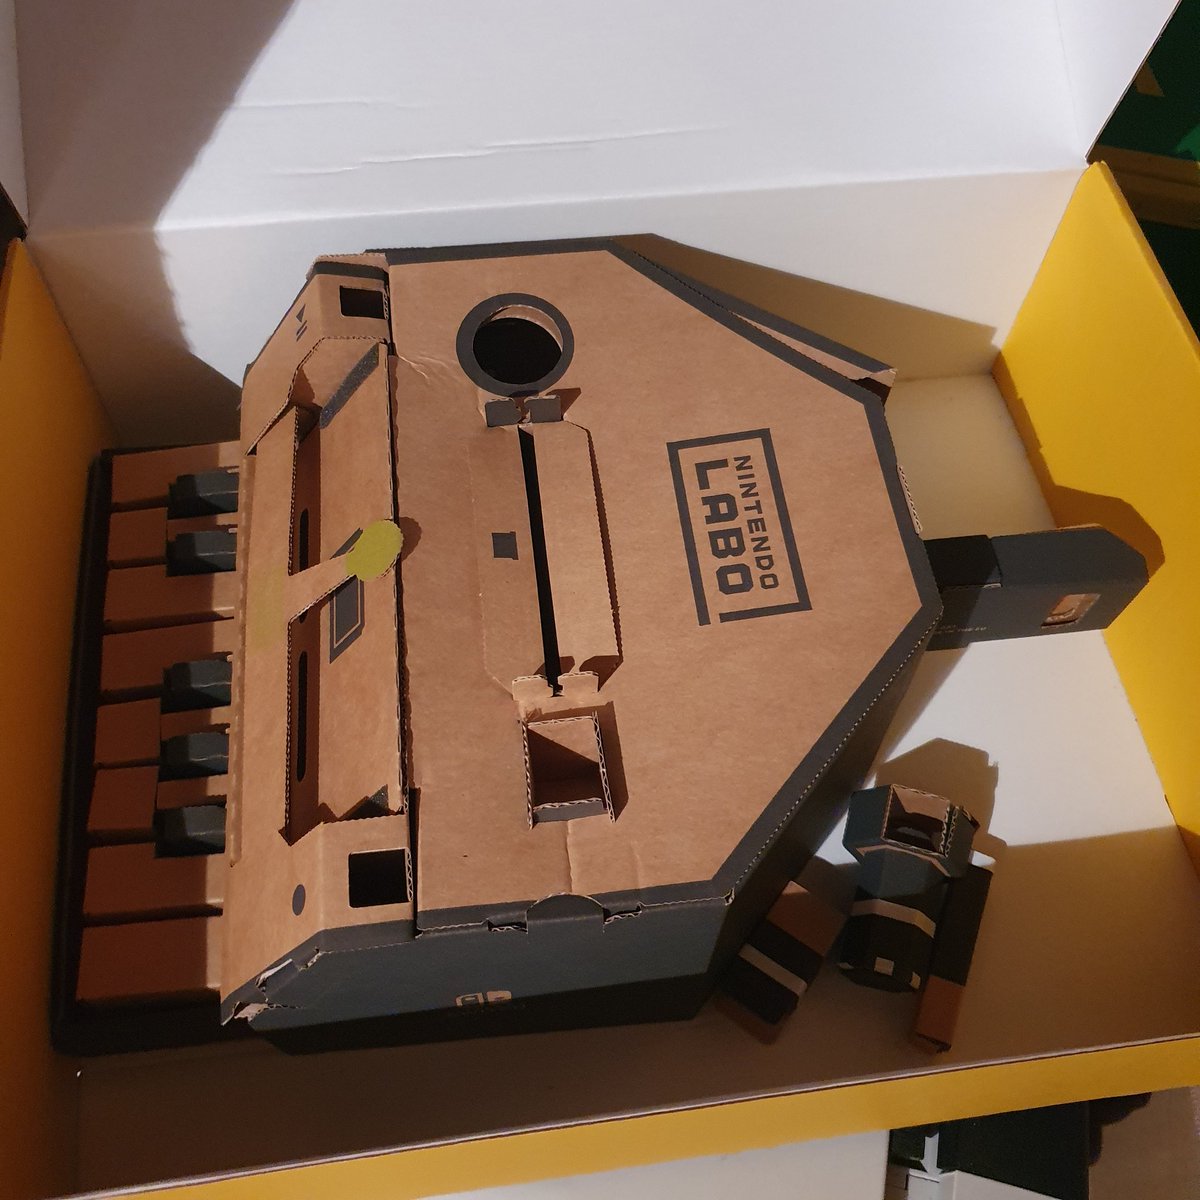 Ah, LABO. I made you, played with you for a day and then put you in a box.